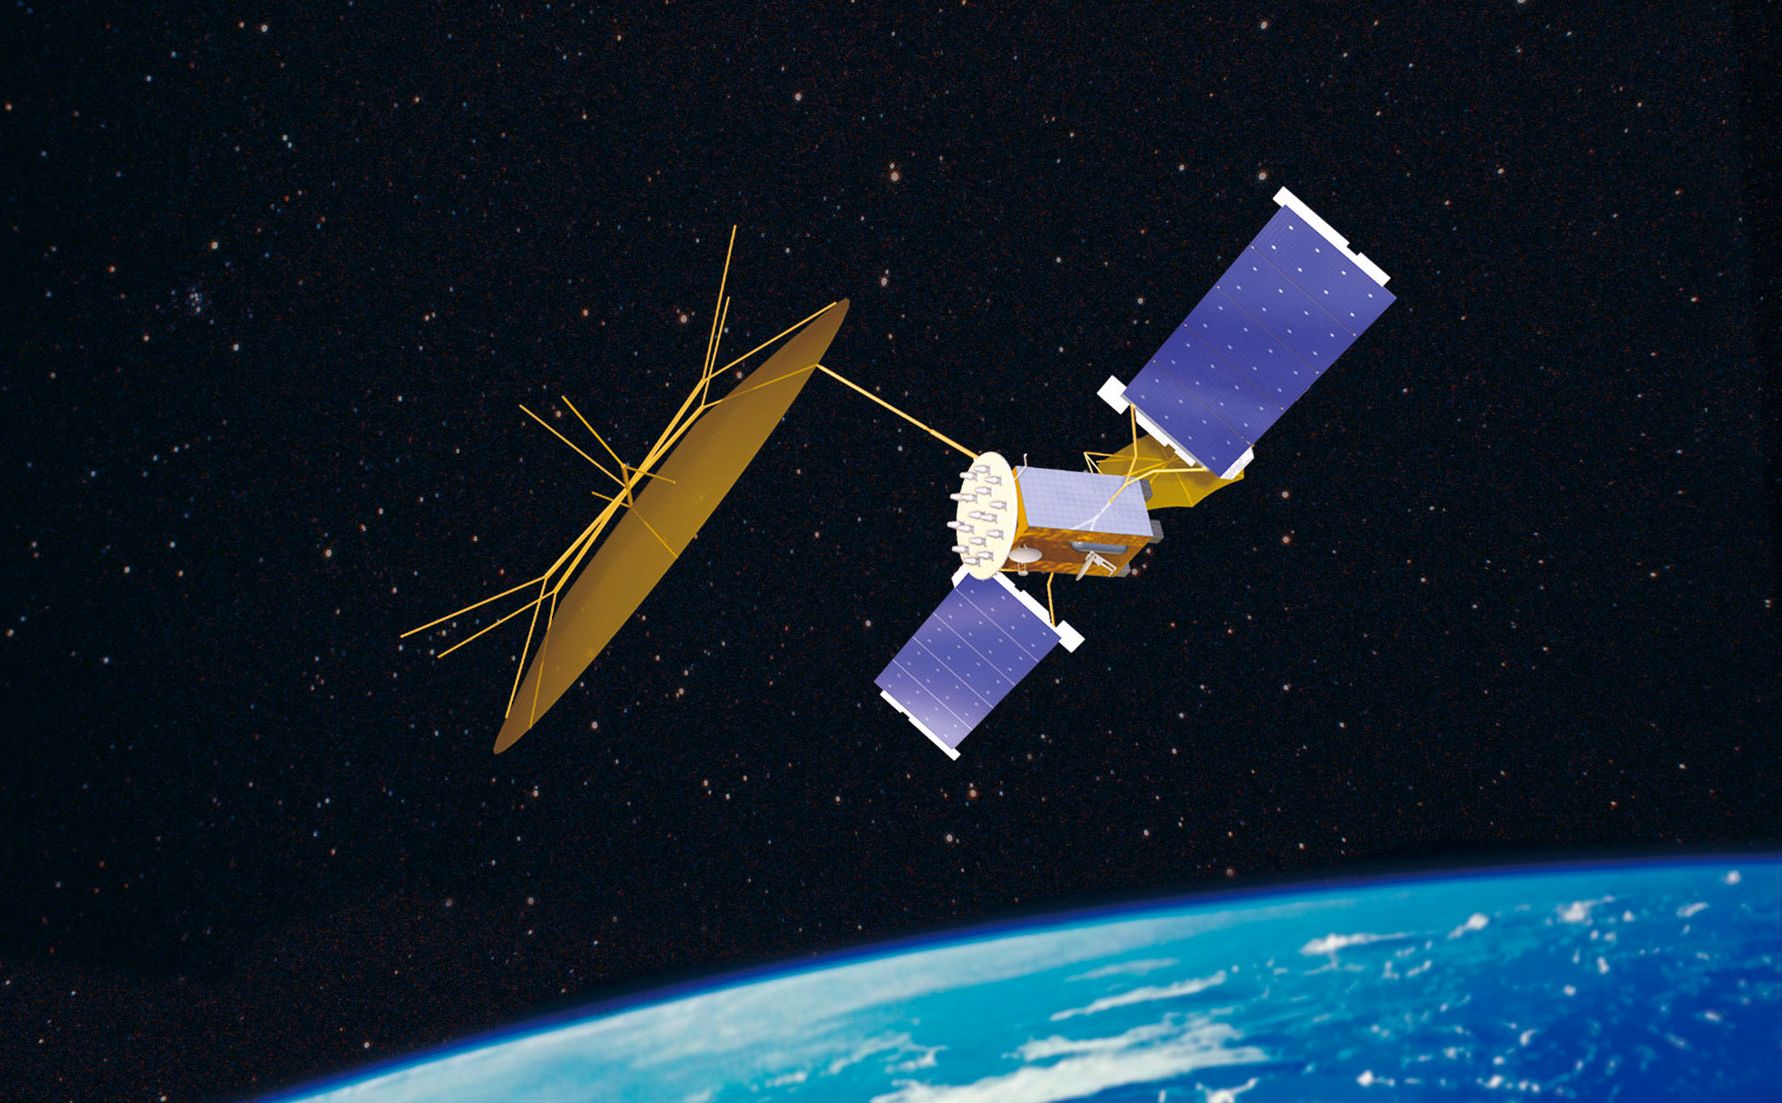 Satellite Communication (SATCOM) Market Presents an Overall Analysis, Trends and Forecast to 